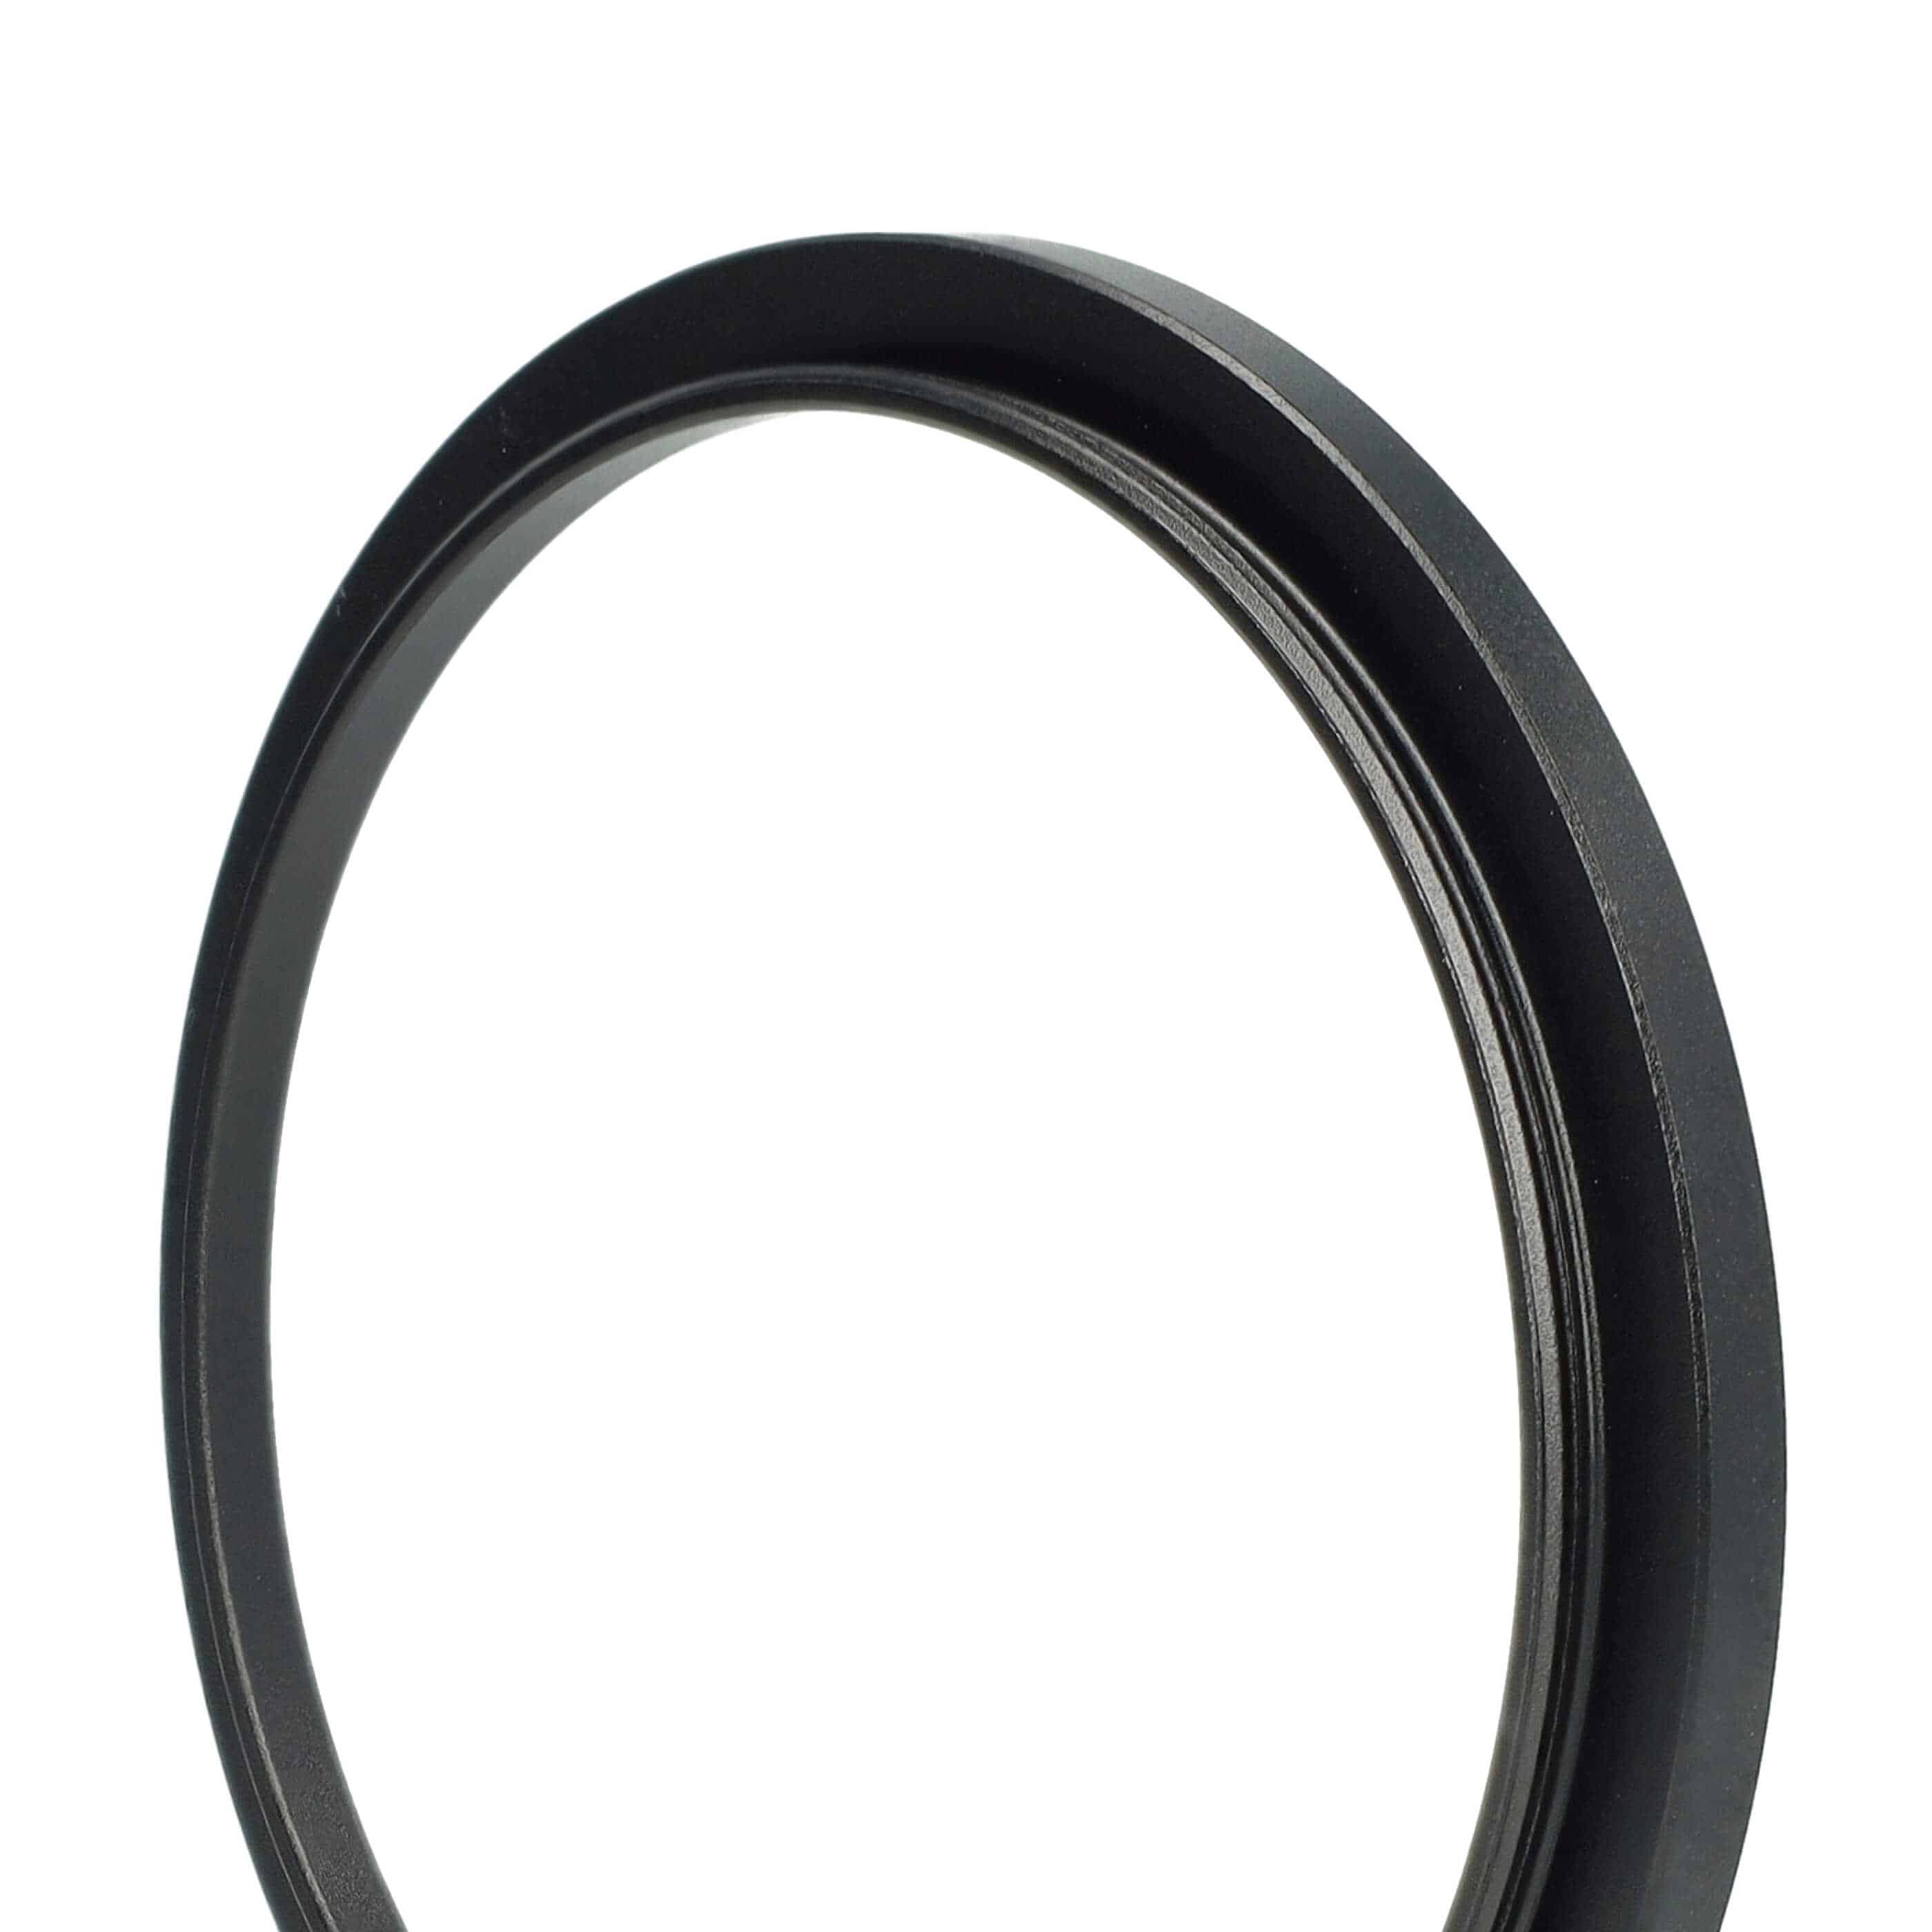 Step-Up Ring Adapter of 62 mm to 67 mmfor various Camera Lens - Filter Adapter